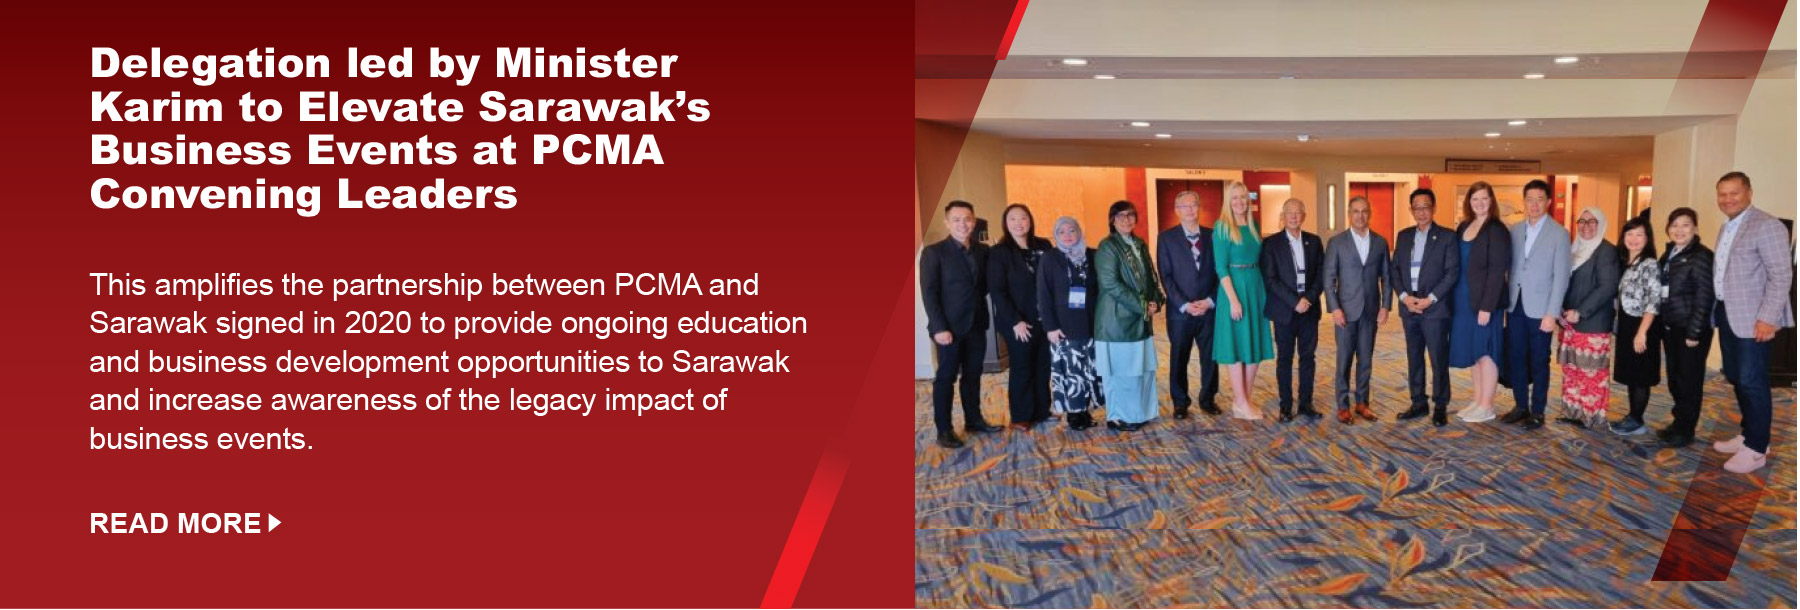 Delegation led by Minister Karim to Elevate Sarawak’s Business Events at PCMA Convening Leaders